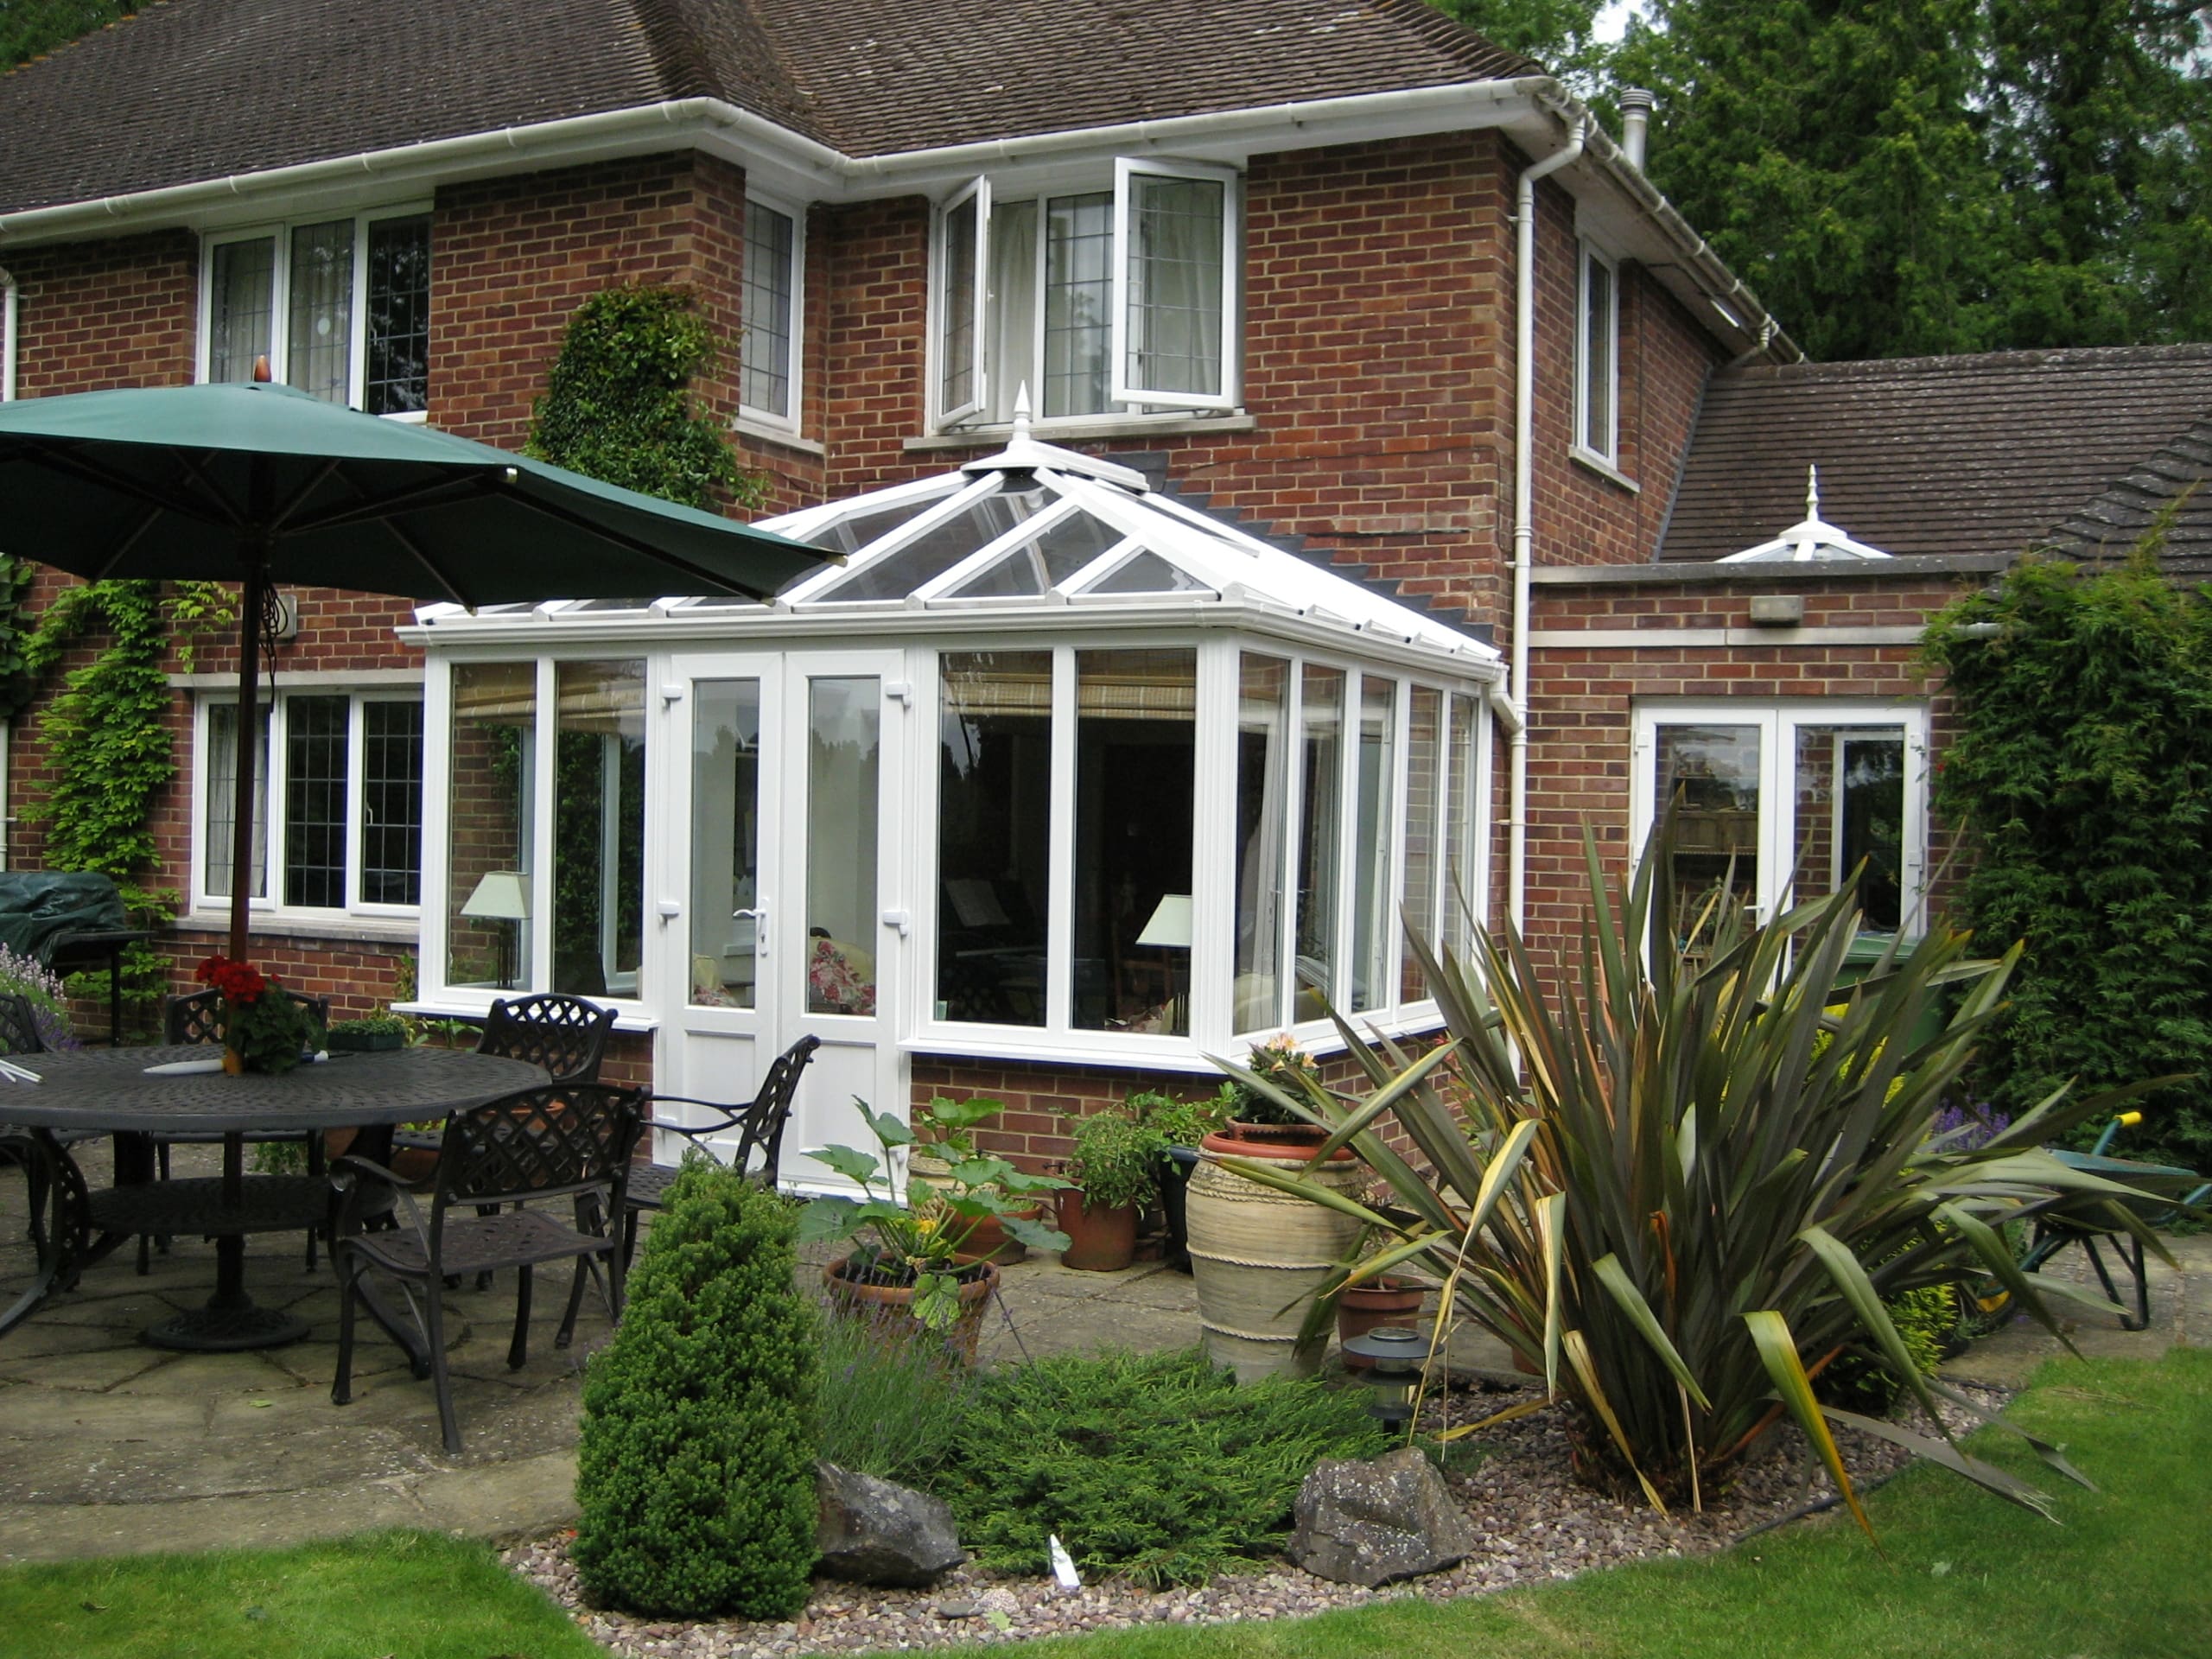 Rear of a property featuring mature shrubs and conservatory.